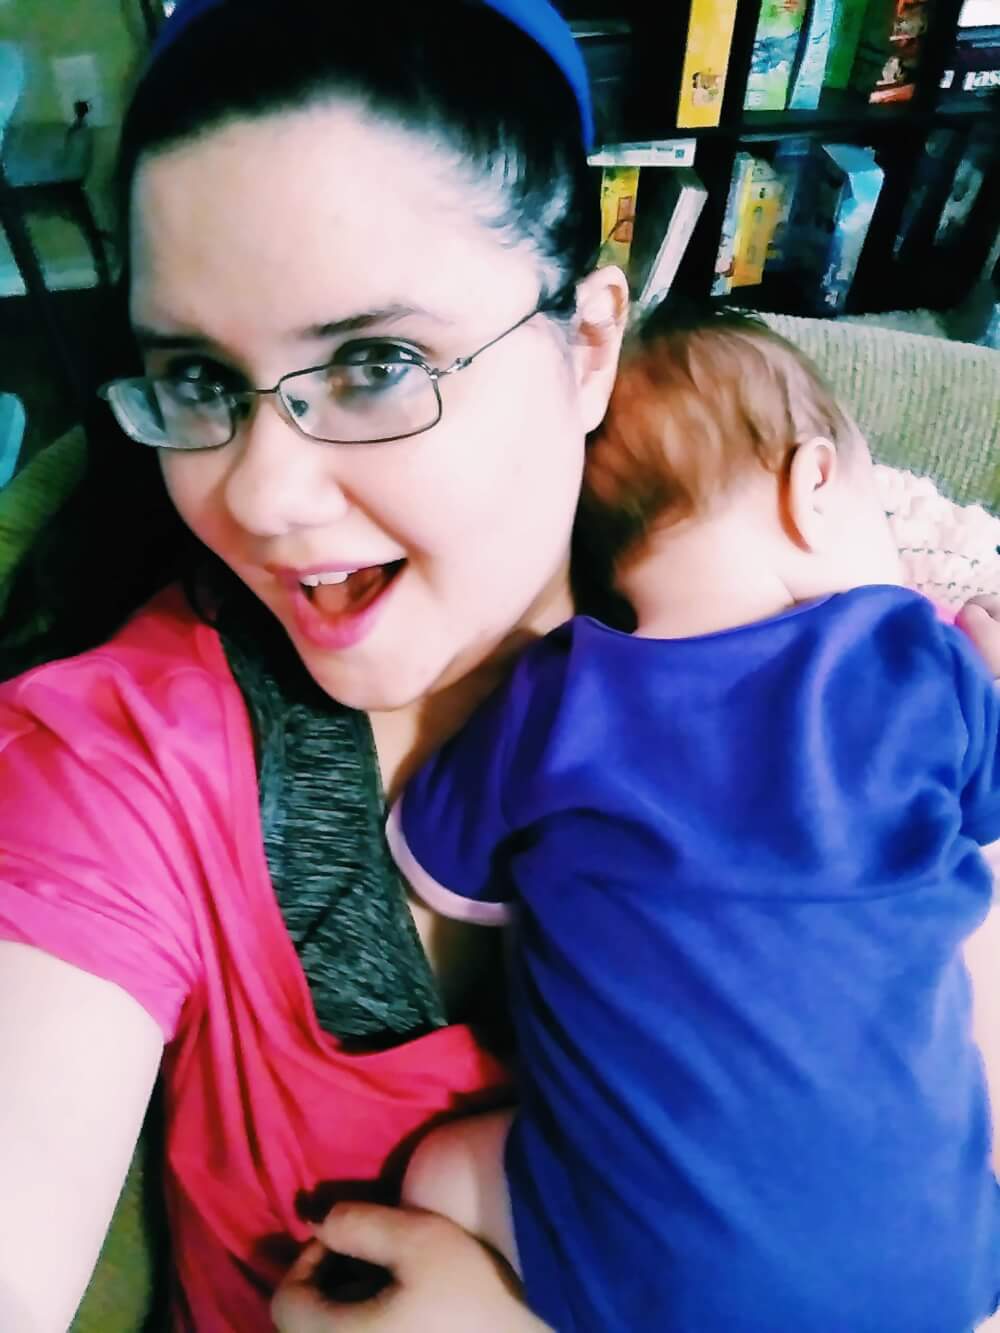 Selfie of me smiling while a baby is asleep on my shoulder